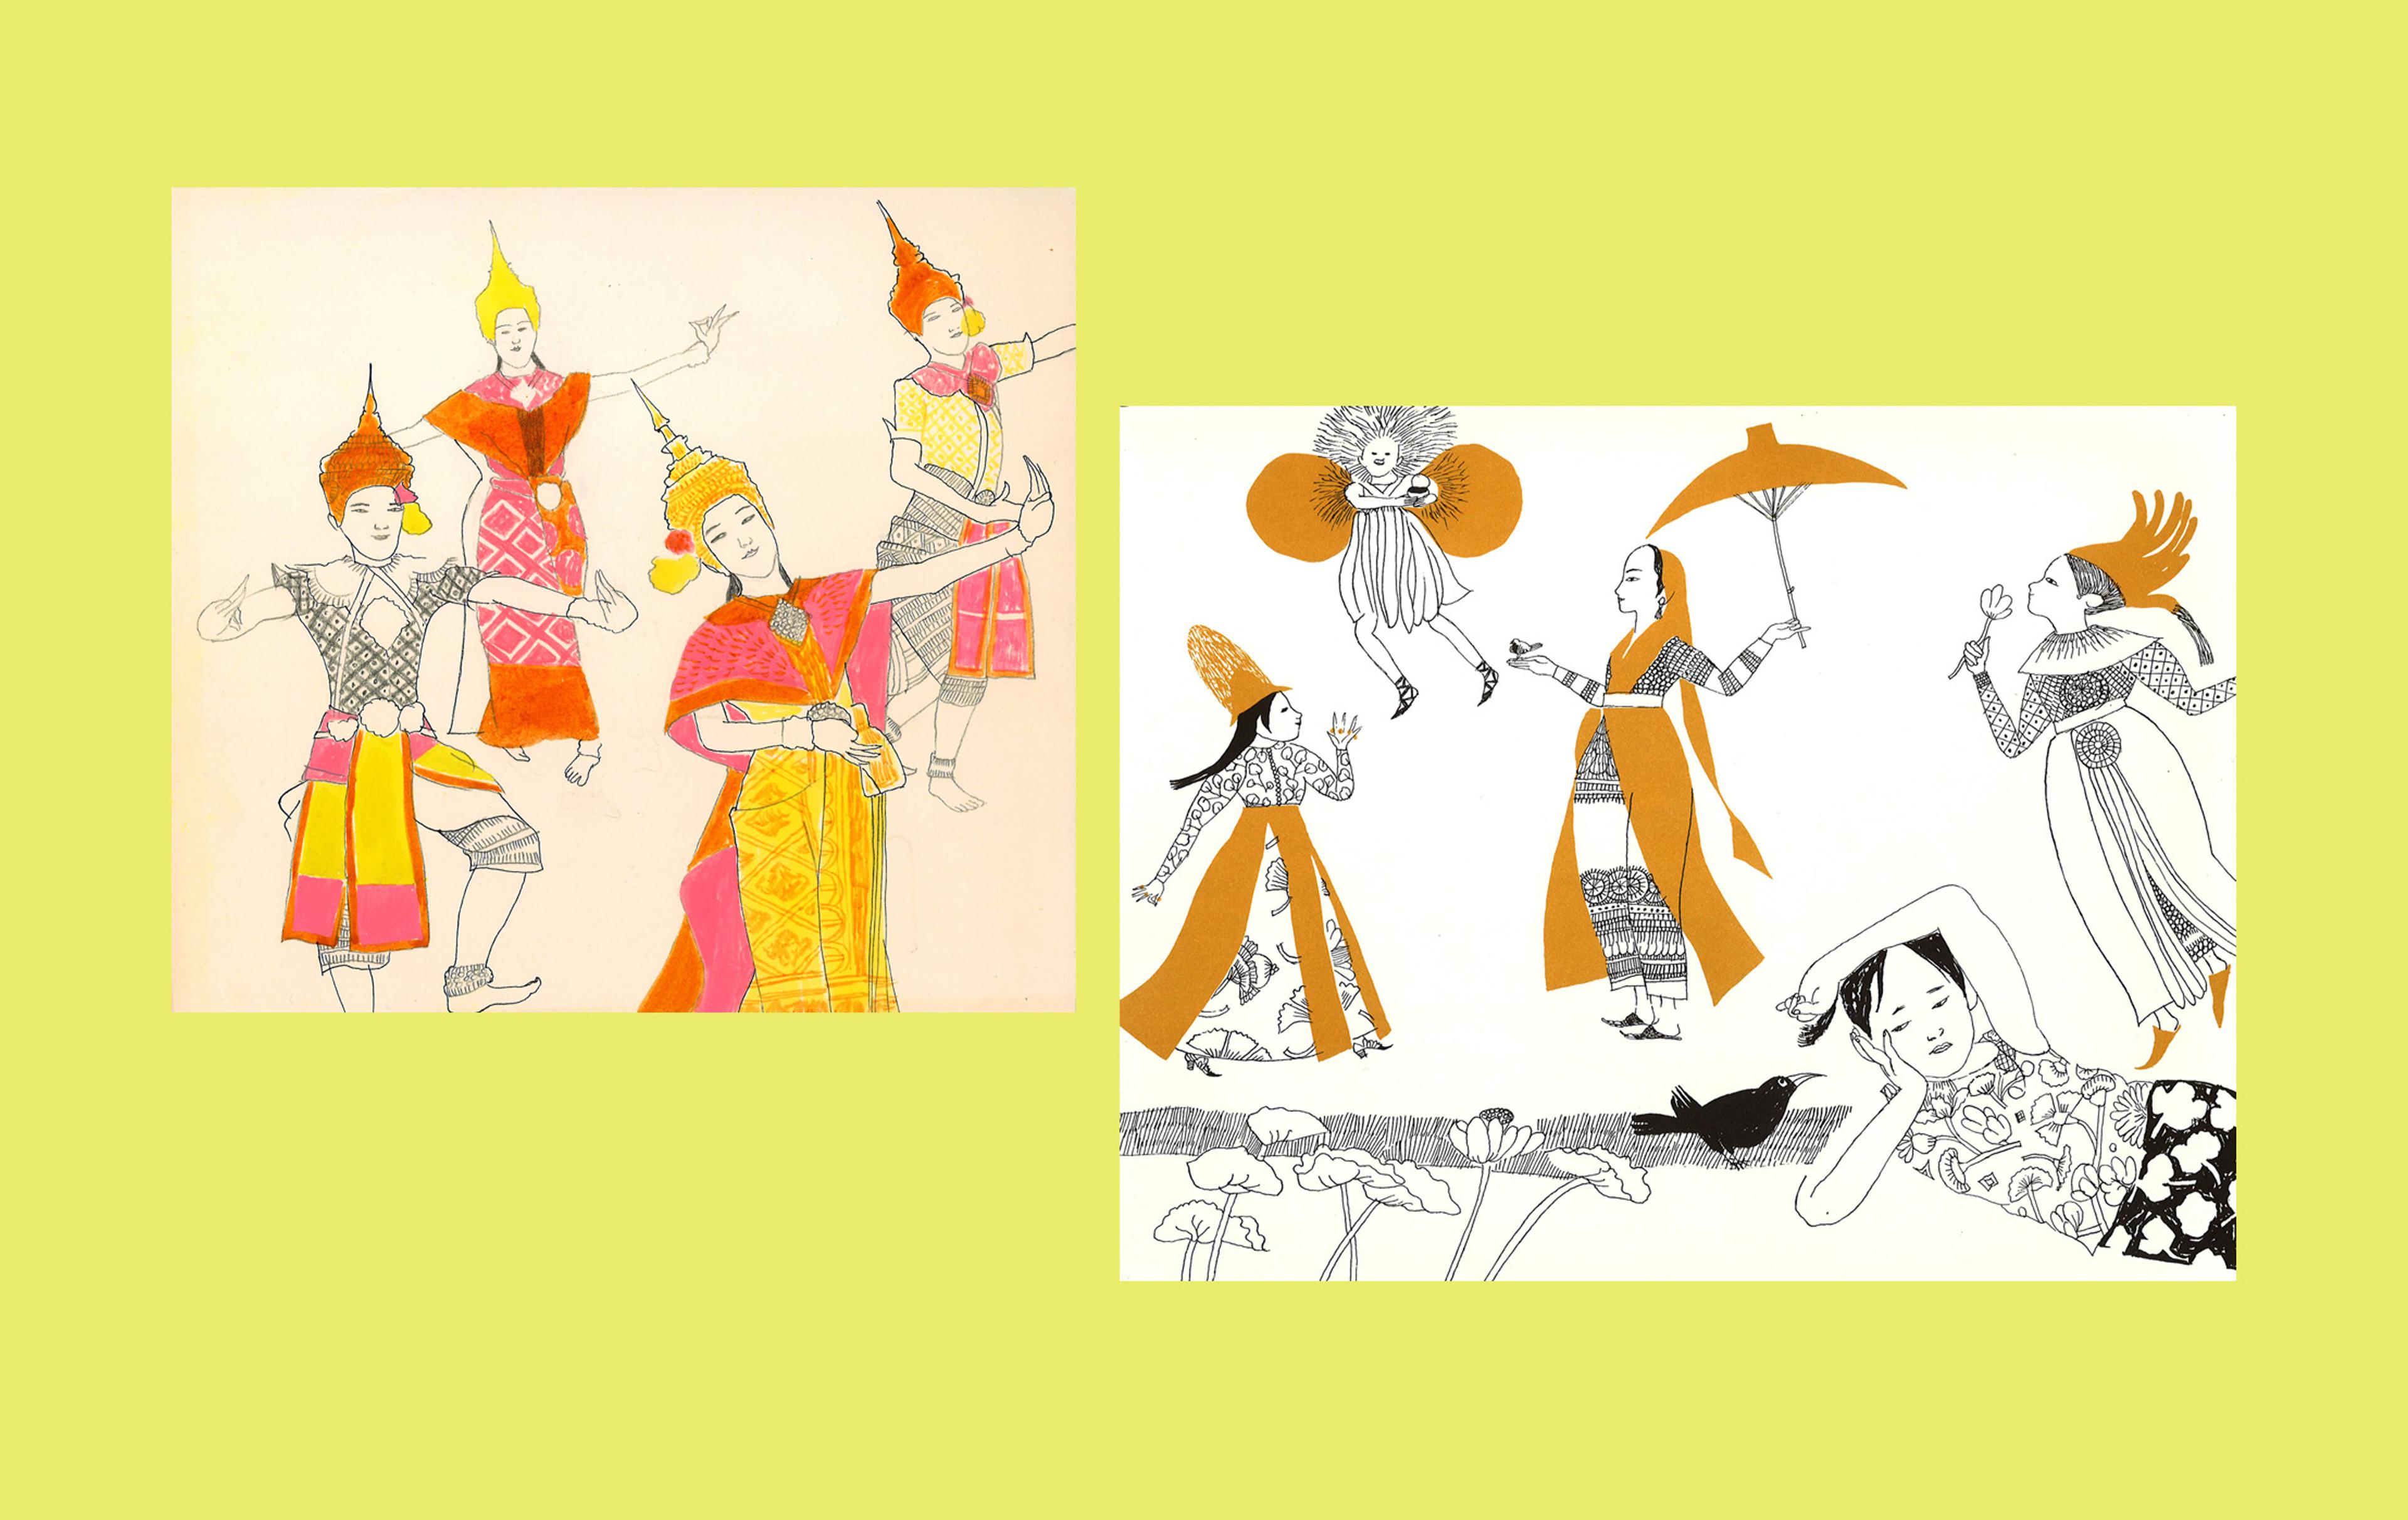 Black ink and pencil drawing of Thai dancers with orange and yellow details, and black, white and yellow illustration with a young girl in the foreground with a black bird, and dancers in the background